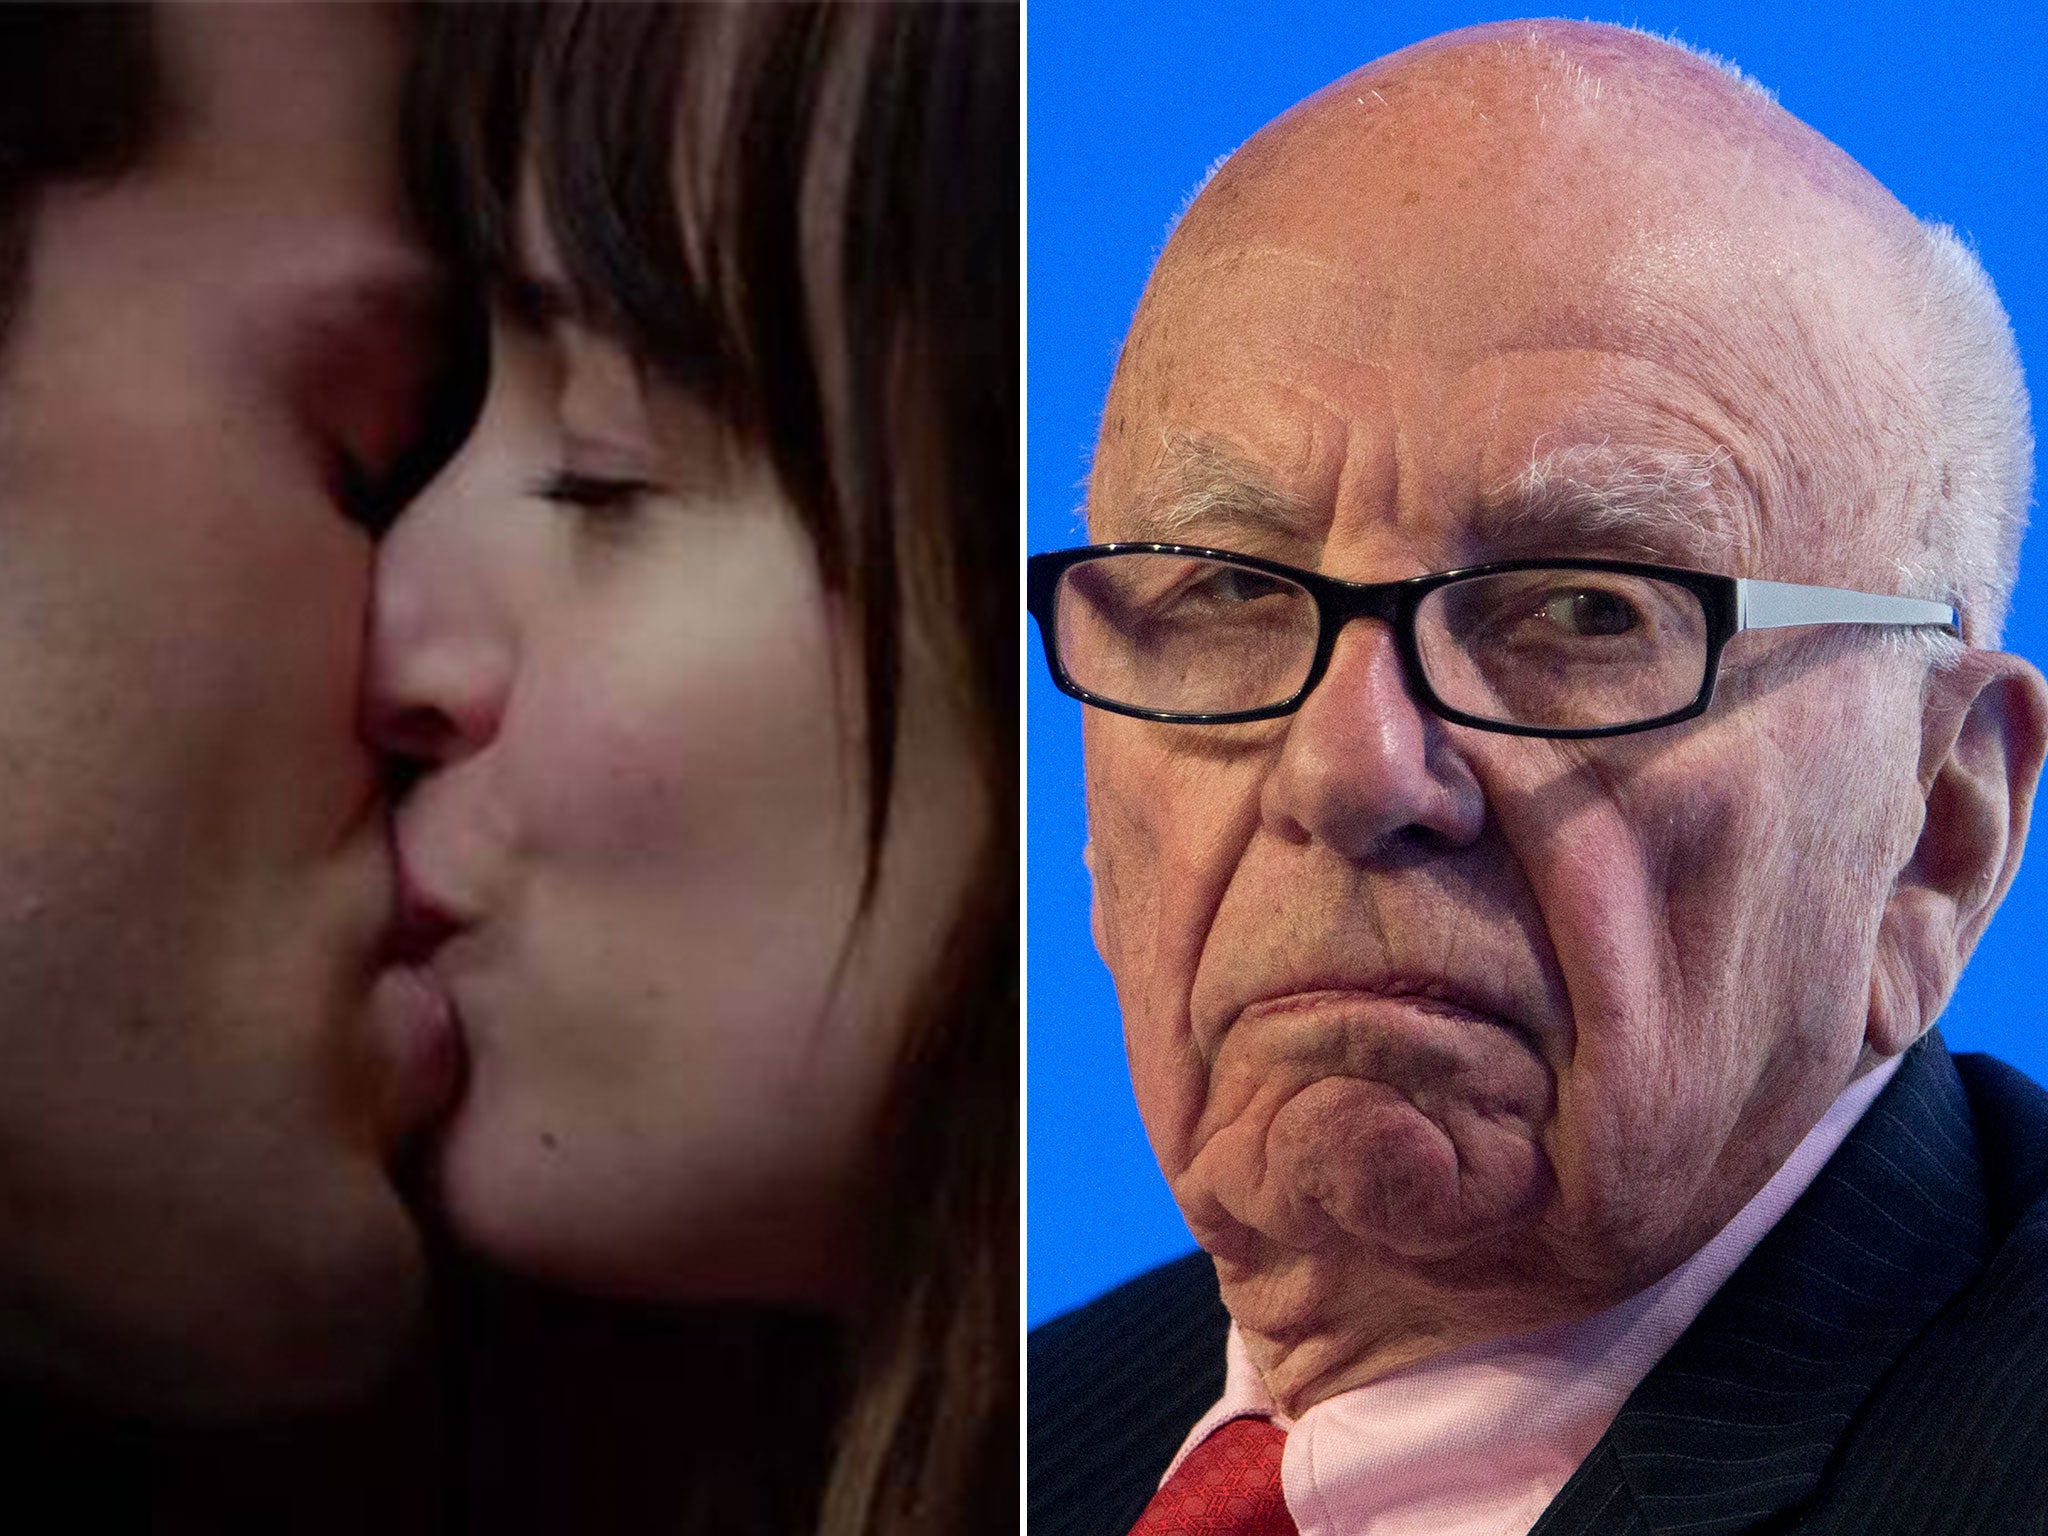 Rupert Murdoch is decidedly unimpressed with Fifty Shades of Grey